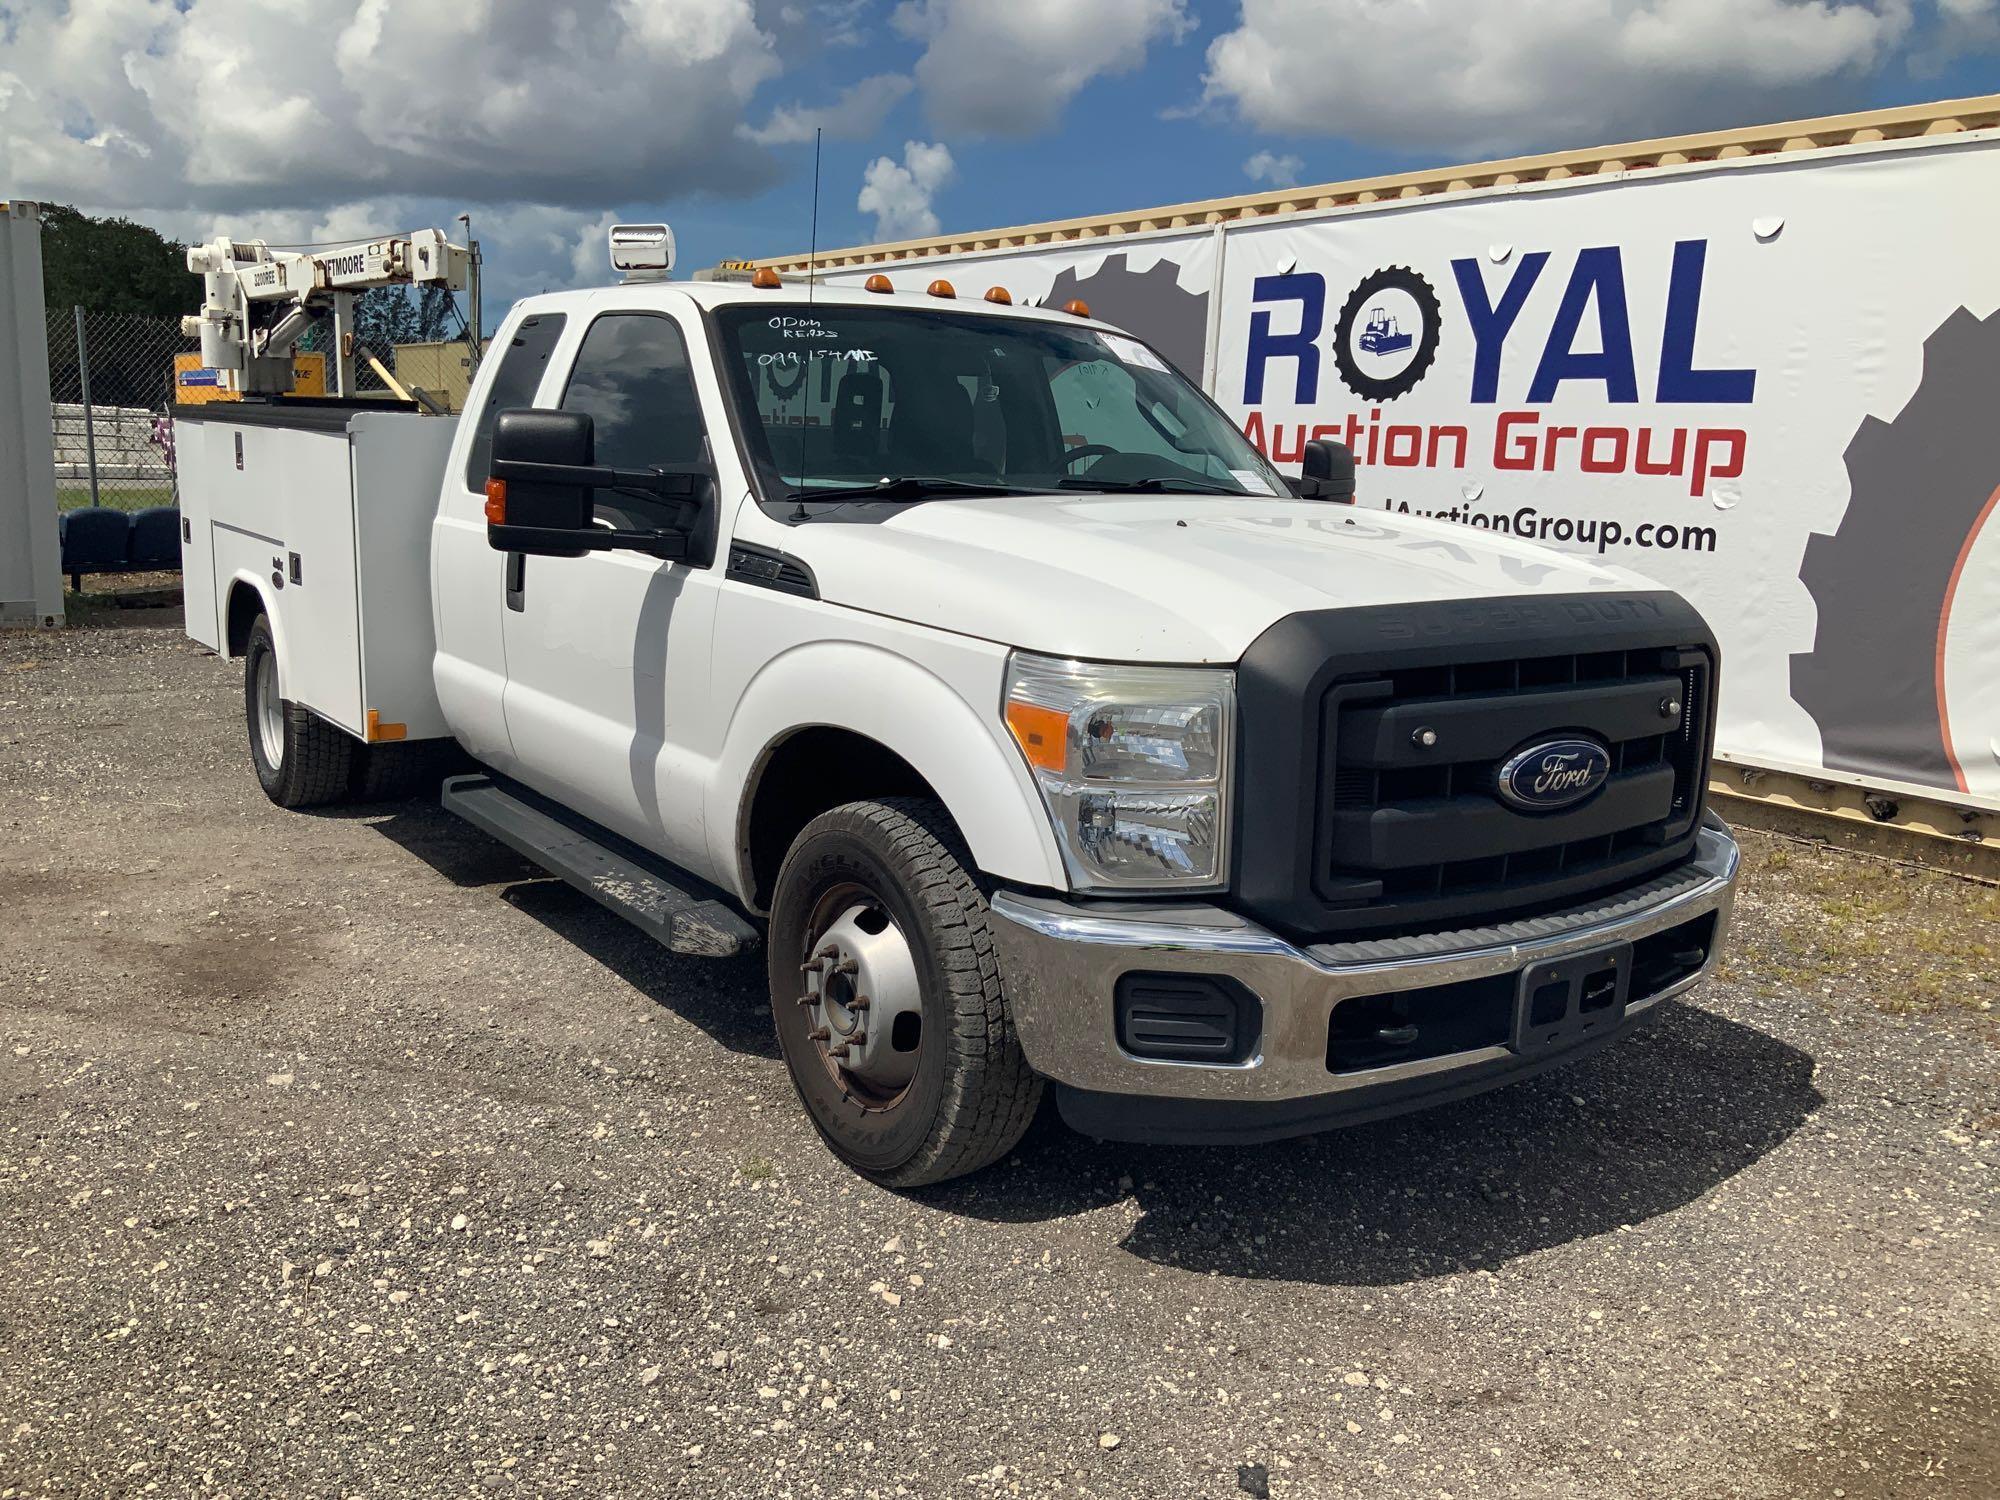 2014 Ford F-350 Extended Cab Service Crane Truck